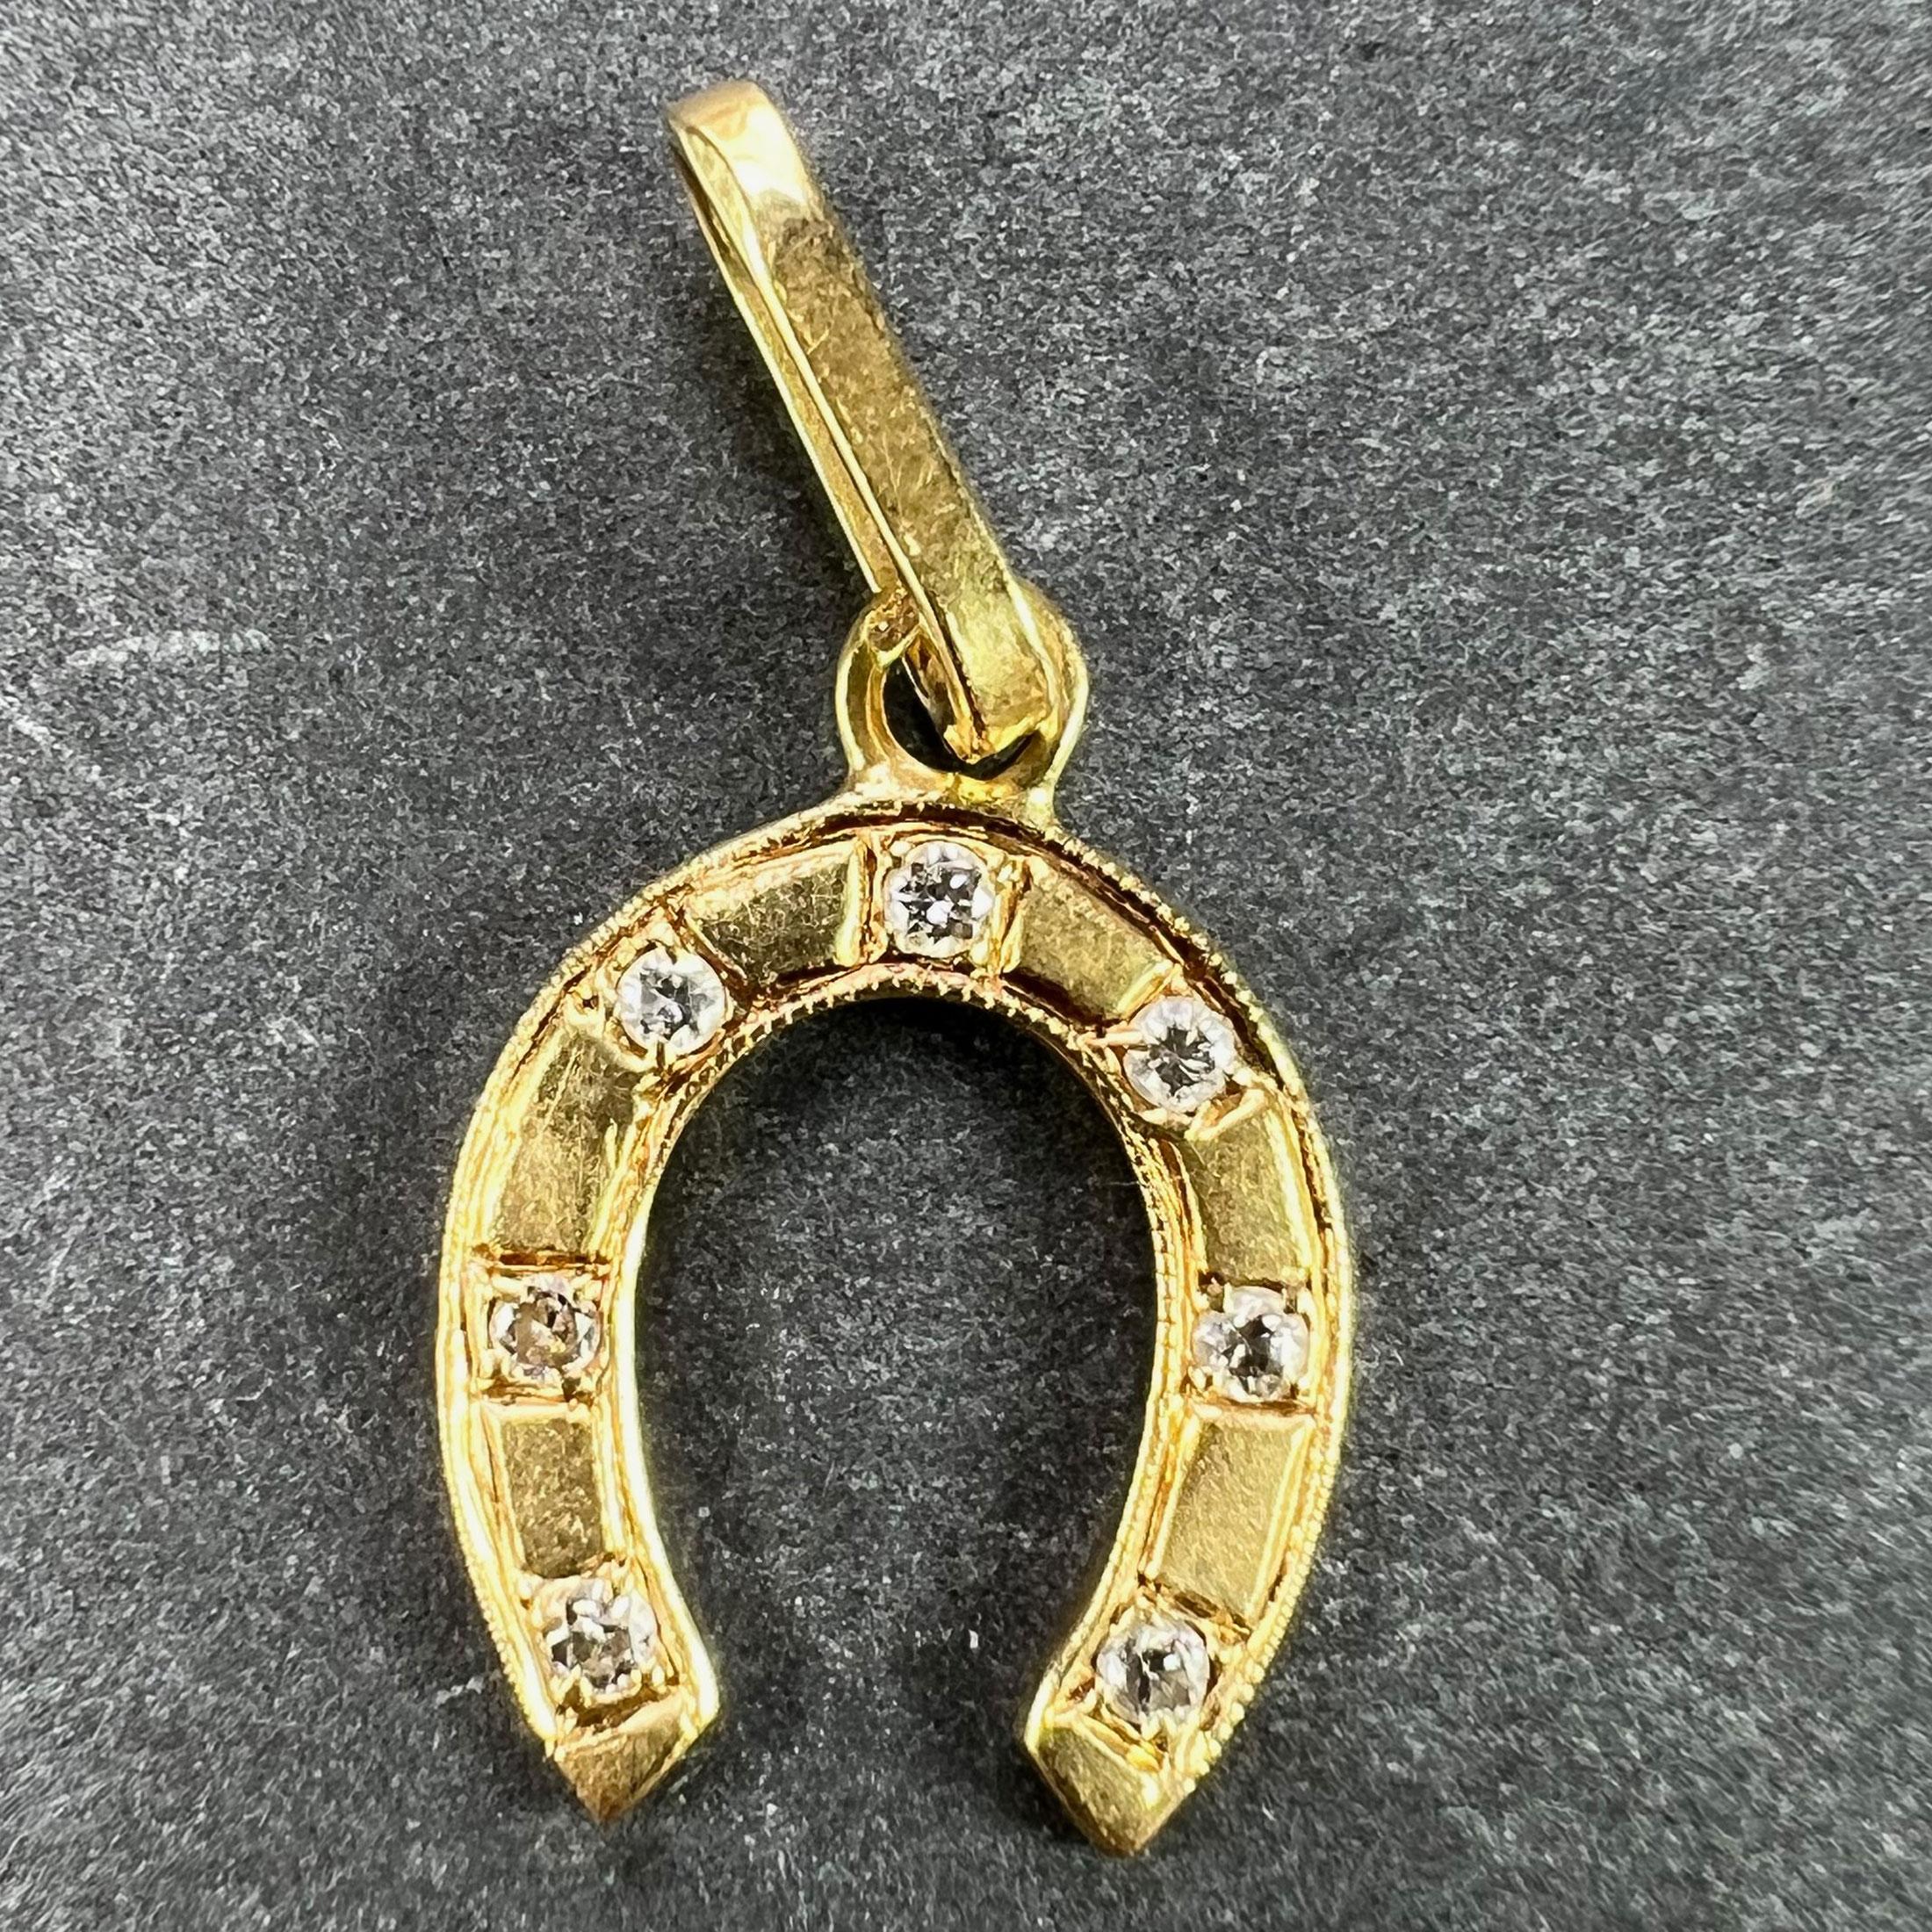 A French 18 karat (18K) yellow gold charm pendant designed as a lucky horseshoe set with seven diamonds. Stamped with the eagle's head for 18 karat gold and French manufacture.
 
Dimensions:1.5 x 1.1 x 0.11 cm (not including jump ring)
Weight: 0.88